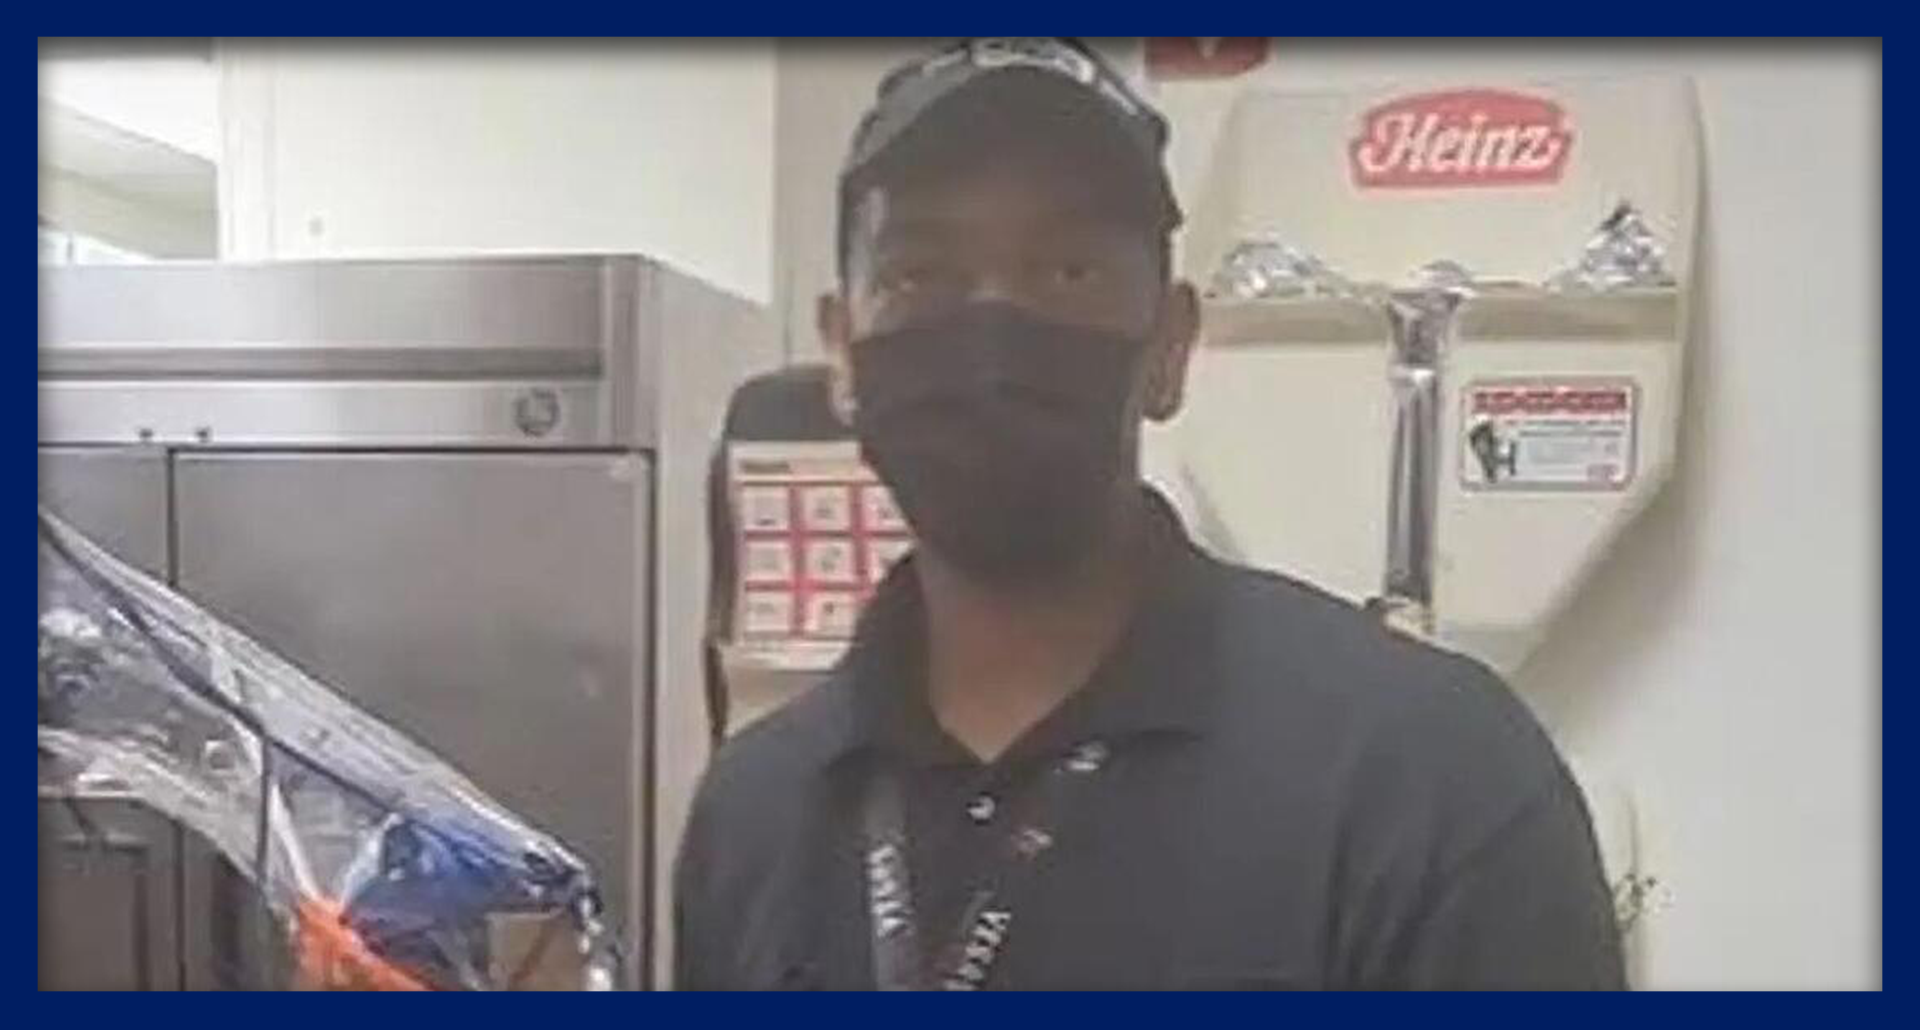 In the News: Burger King worker's 27-year anniversary gift shocks The Internet